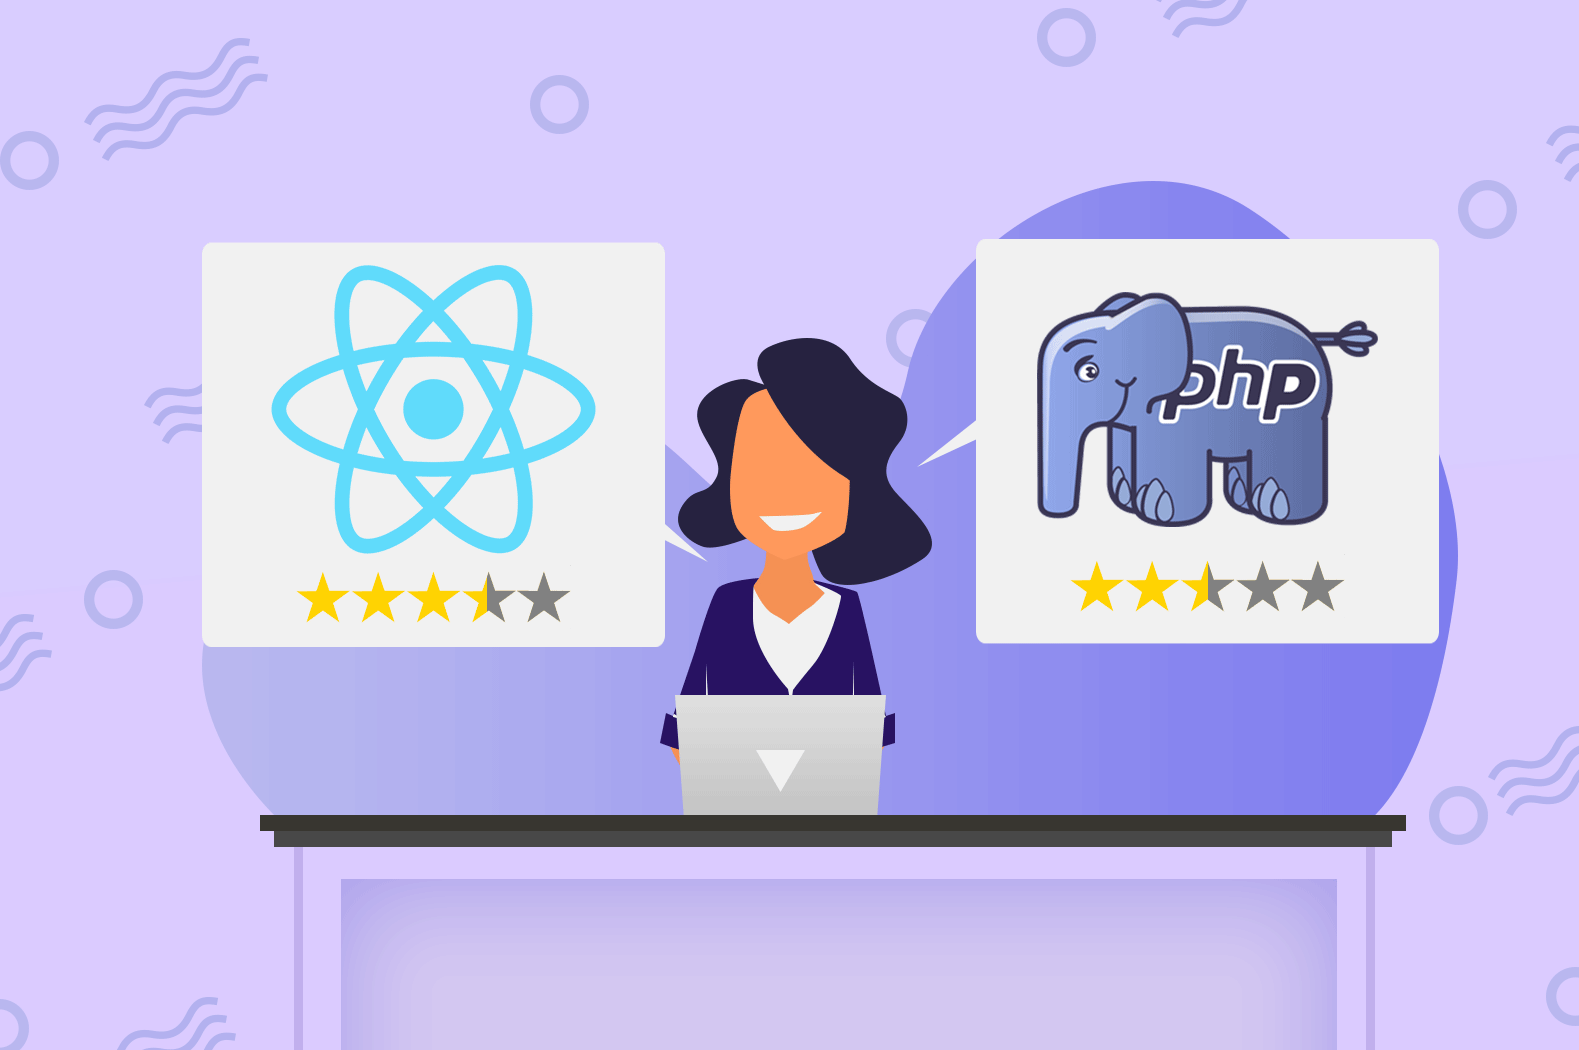 React vs. PHP: Which One Is The Best For Shopify App Development?